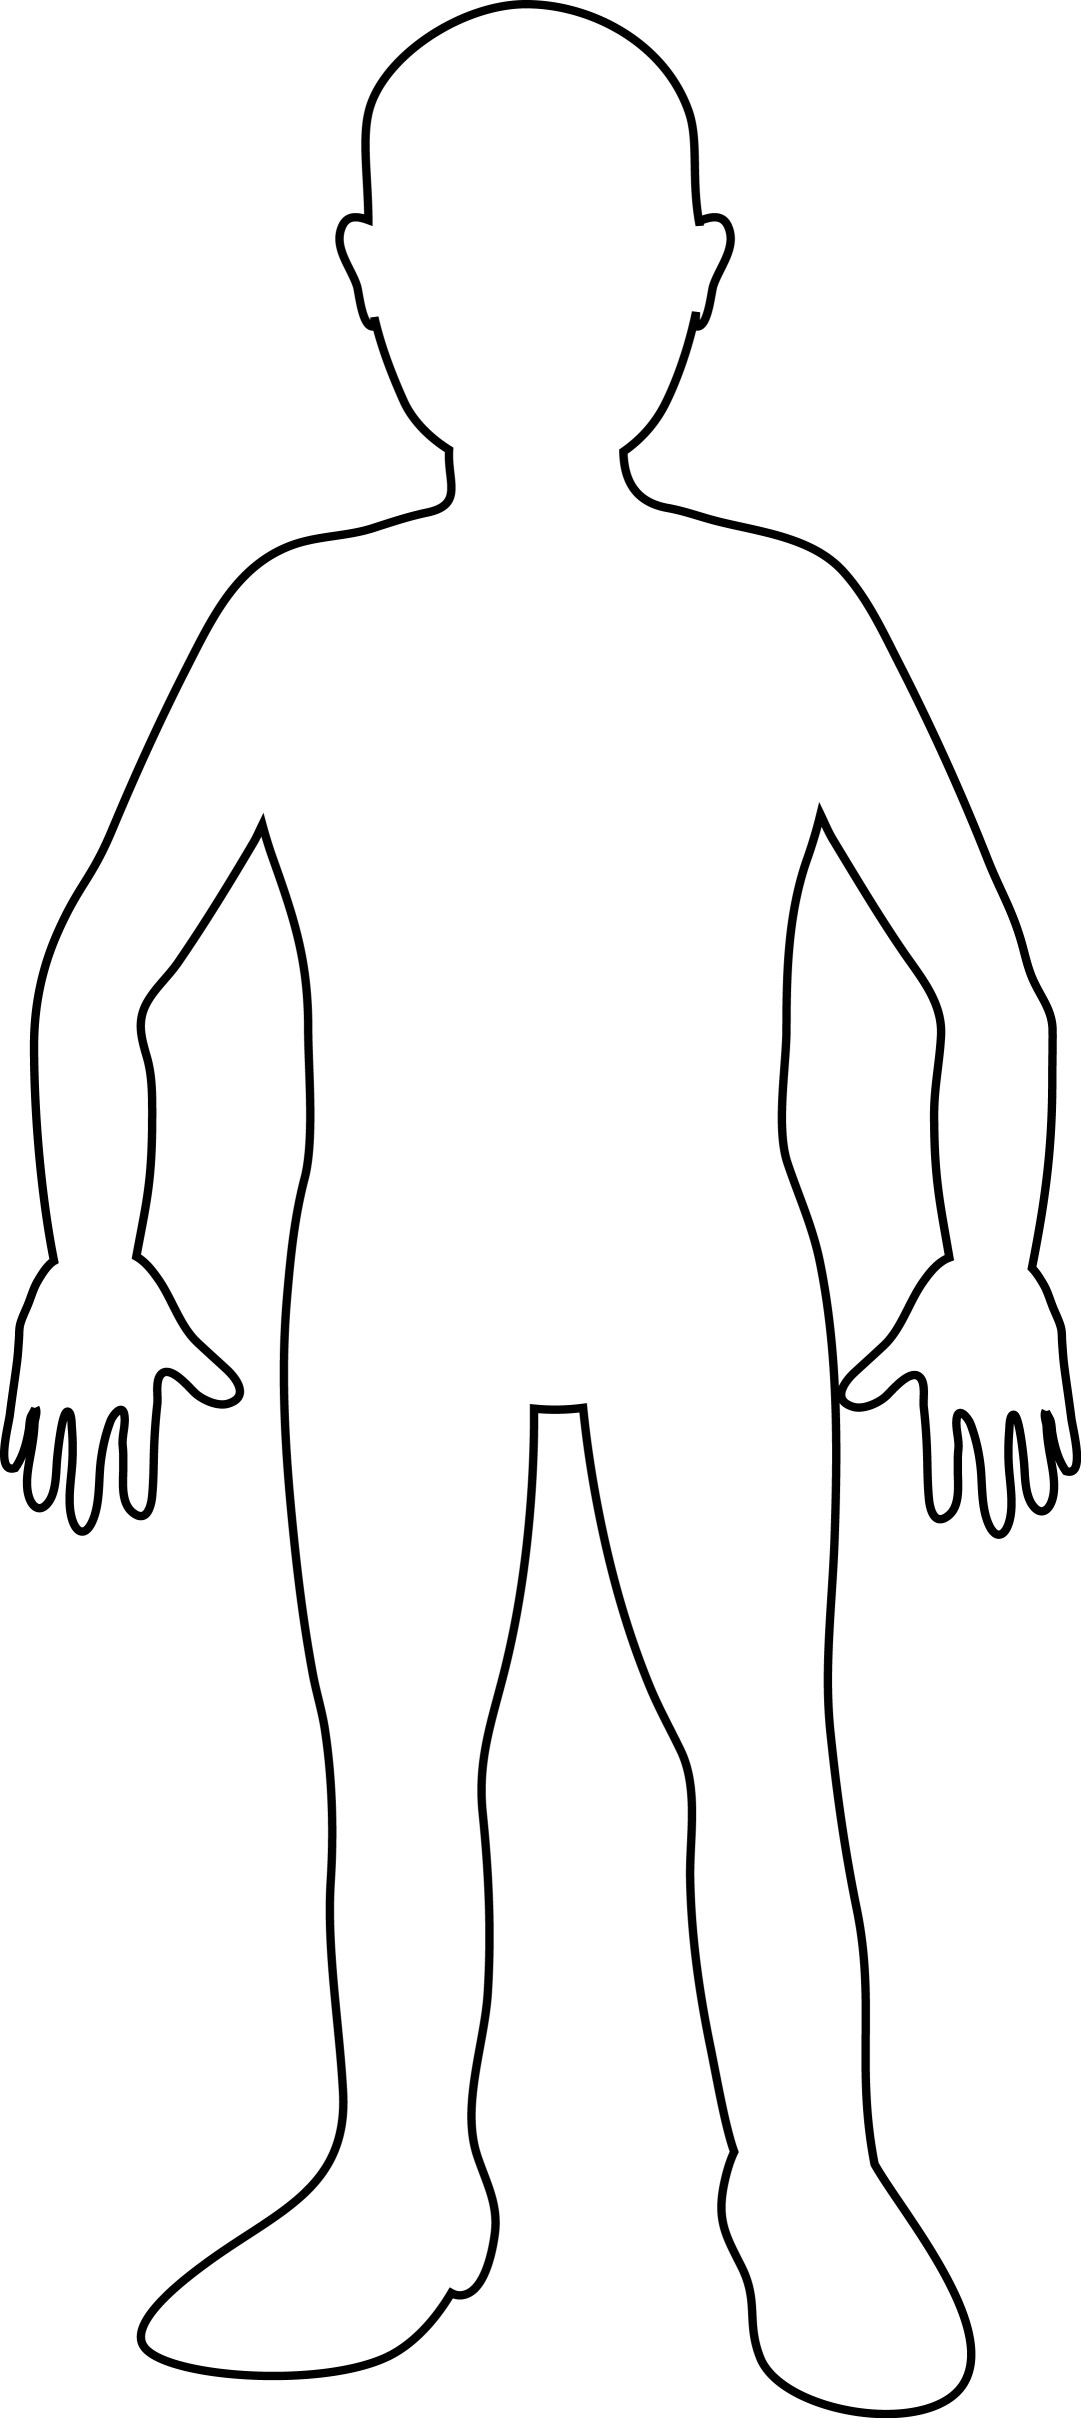 1 person outline clipart